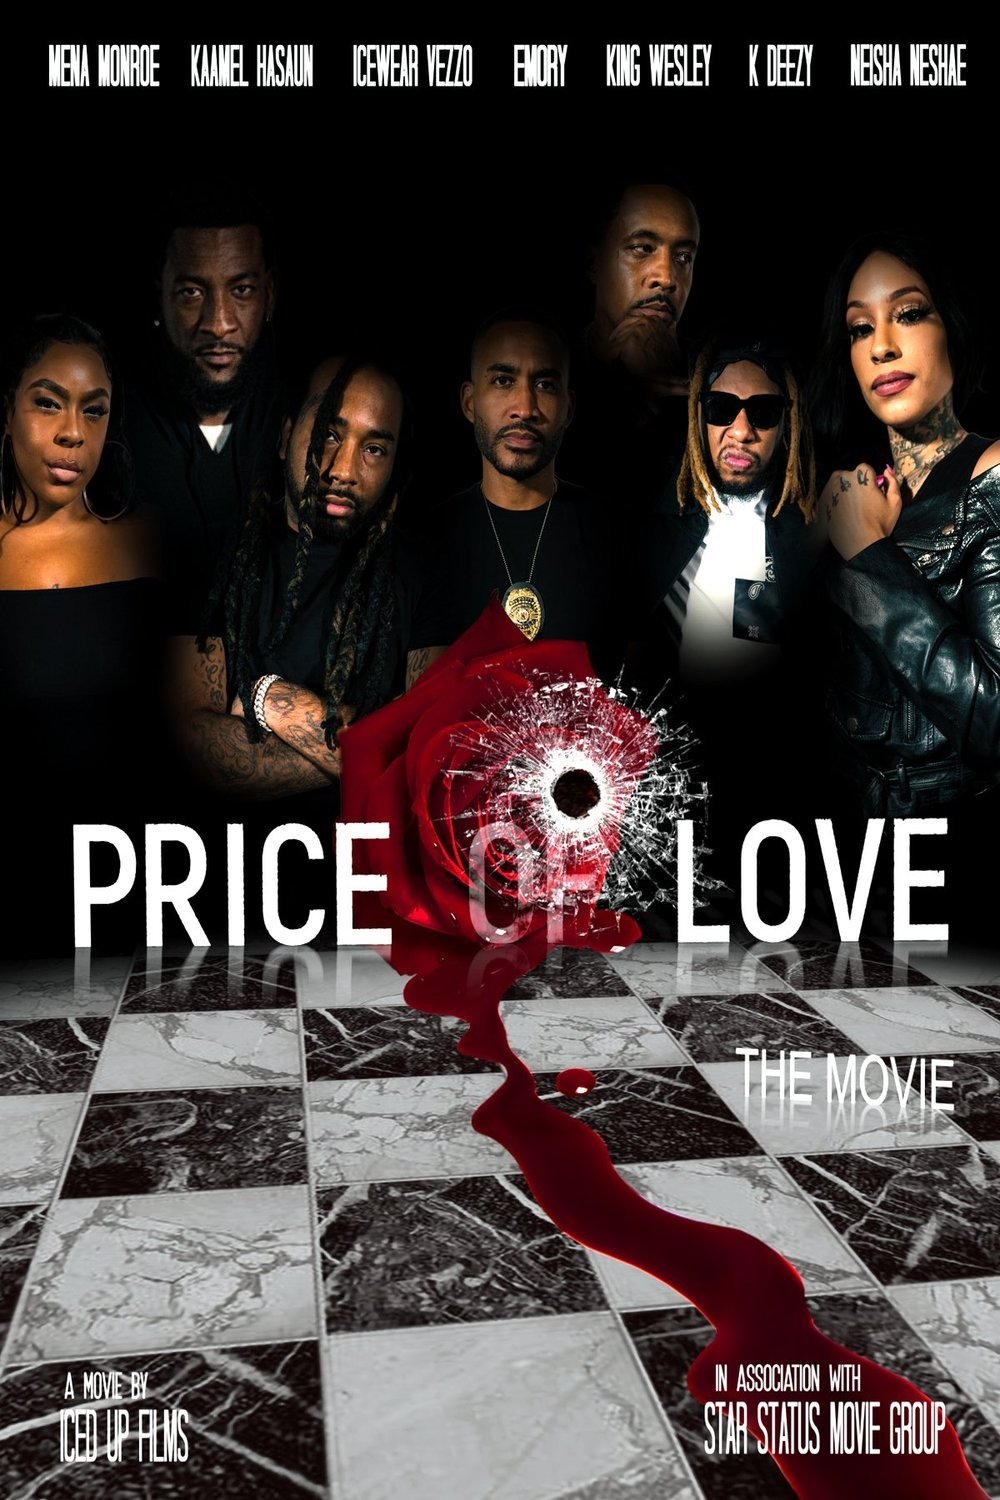 Poster of the movie Price of Love